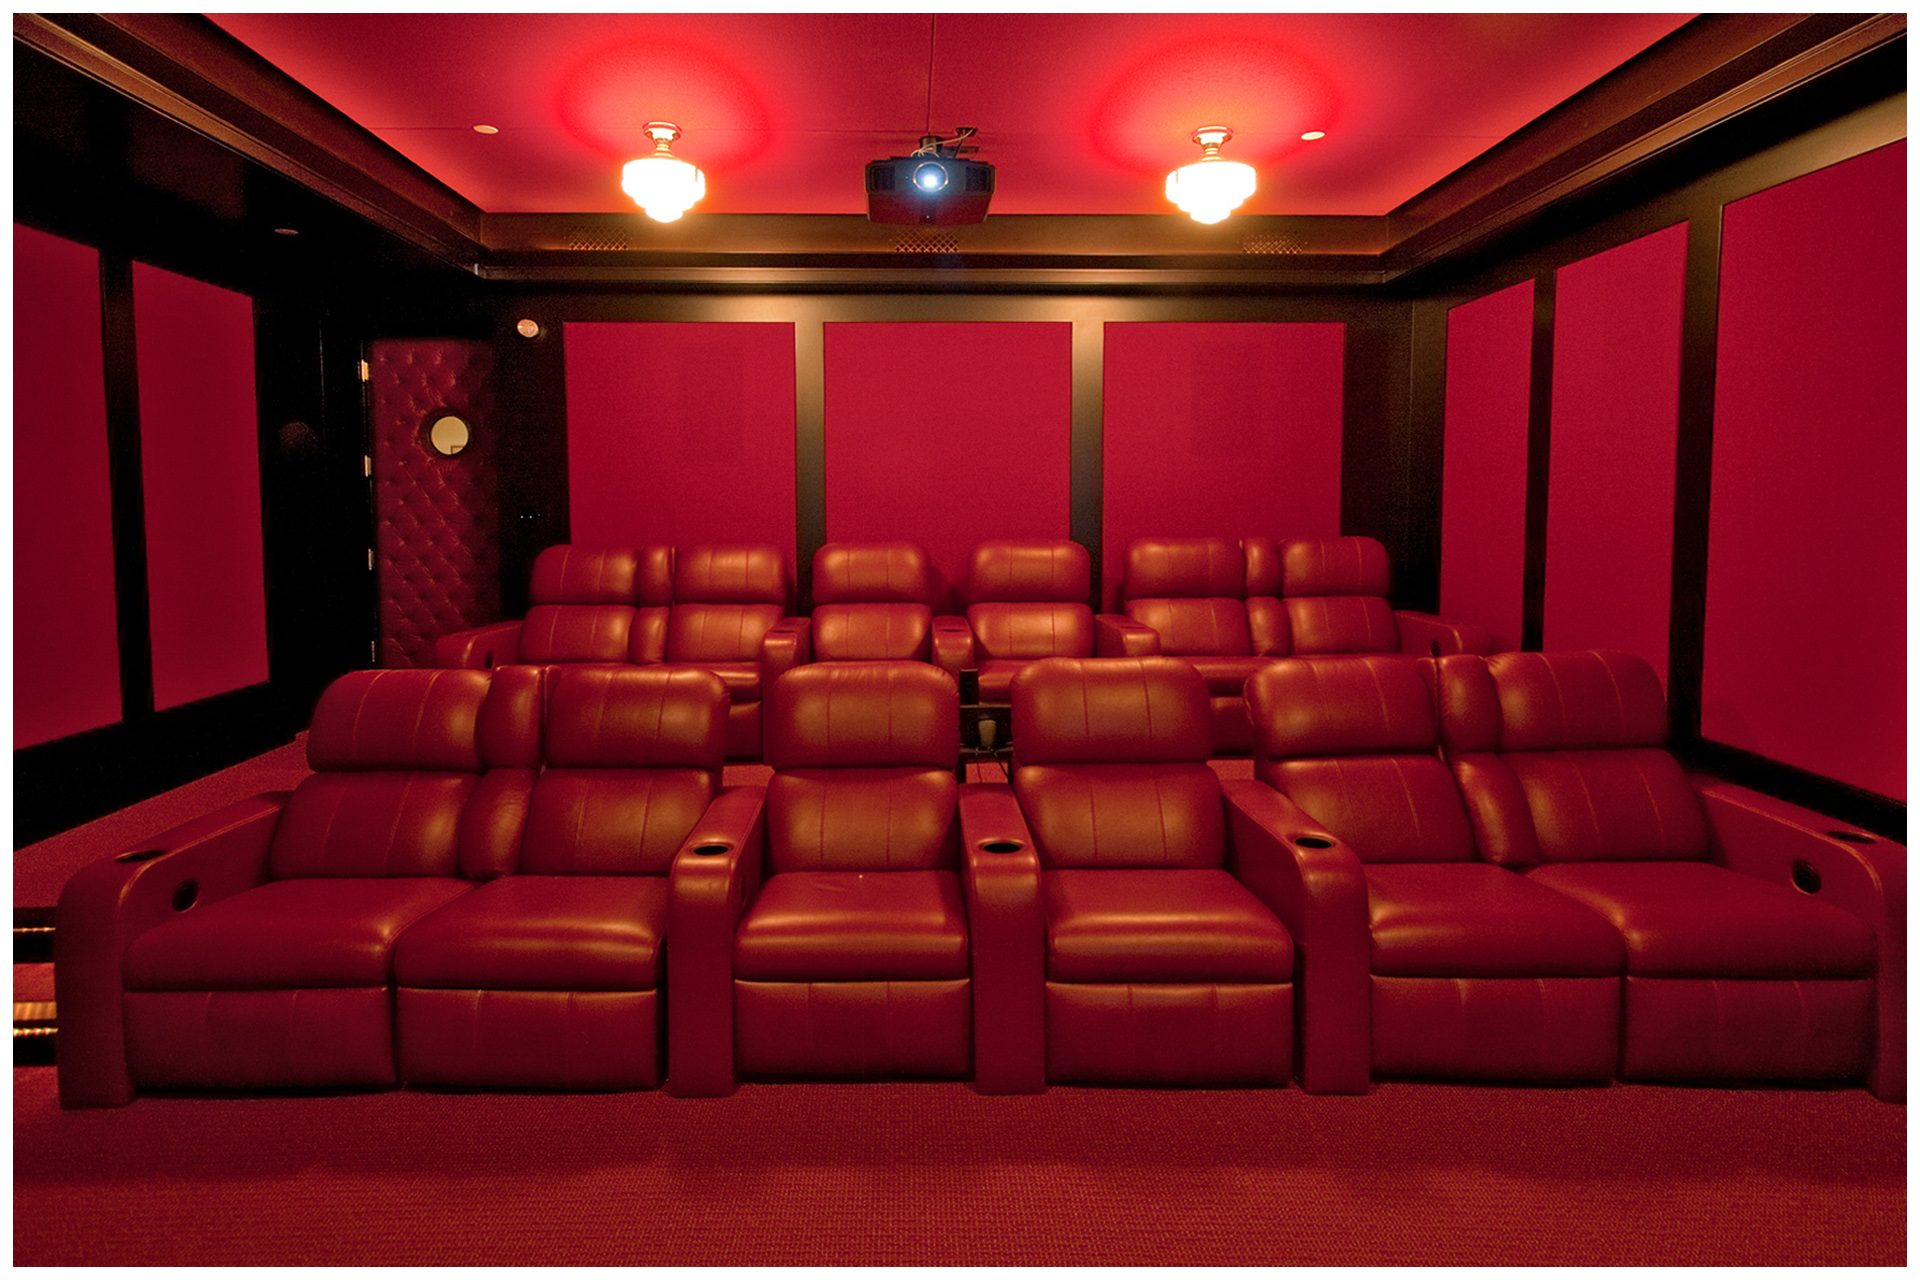 DEDICATED BASEMENT THEATER 12 seat dedicated basement theater with Acoustic paneling to limit sound intrusion outside the room. Front Speaker elements are enclosed into cabinetry and all other  speakers are placed under acoustical panels.Screen and seating are placed on the right side of the room to allow a wide isle leading to exit door in so doing, seats in the center are centered on the screen and front speakers.System is enclosed in an adjacent closet. JBL Synthesis speakers elements are hidden behind fabric in custom wall panelings.